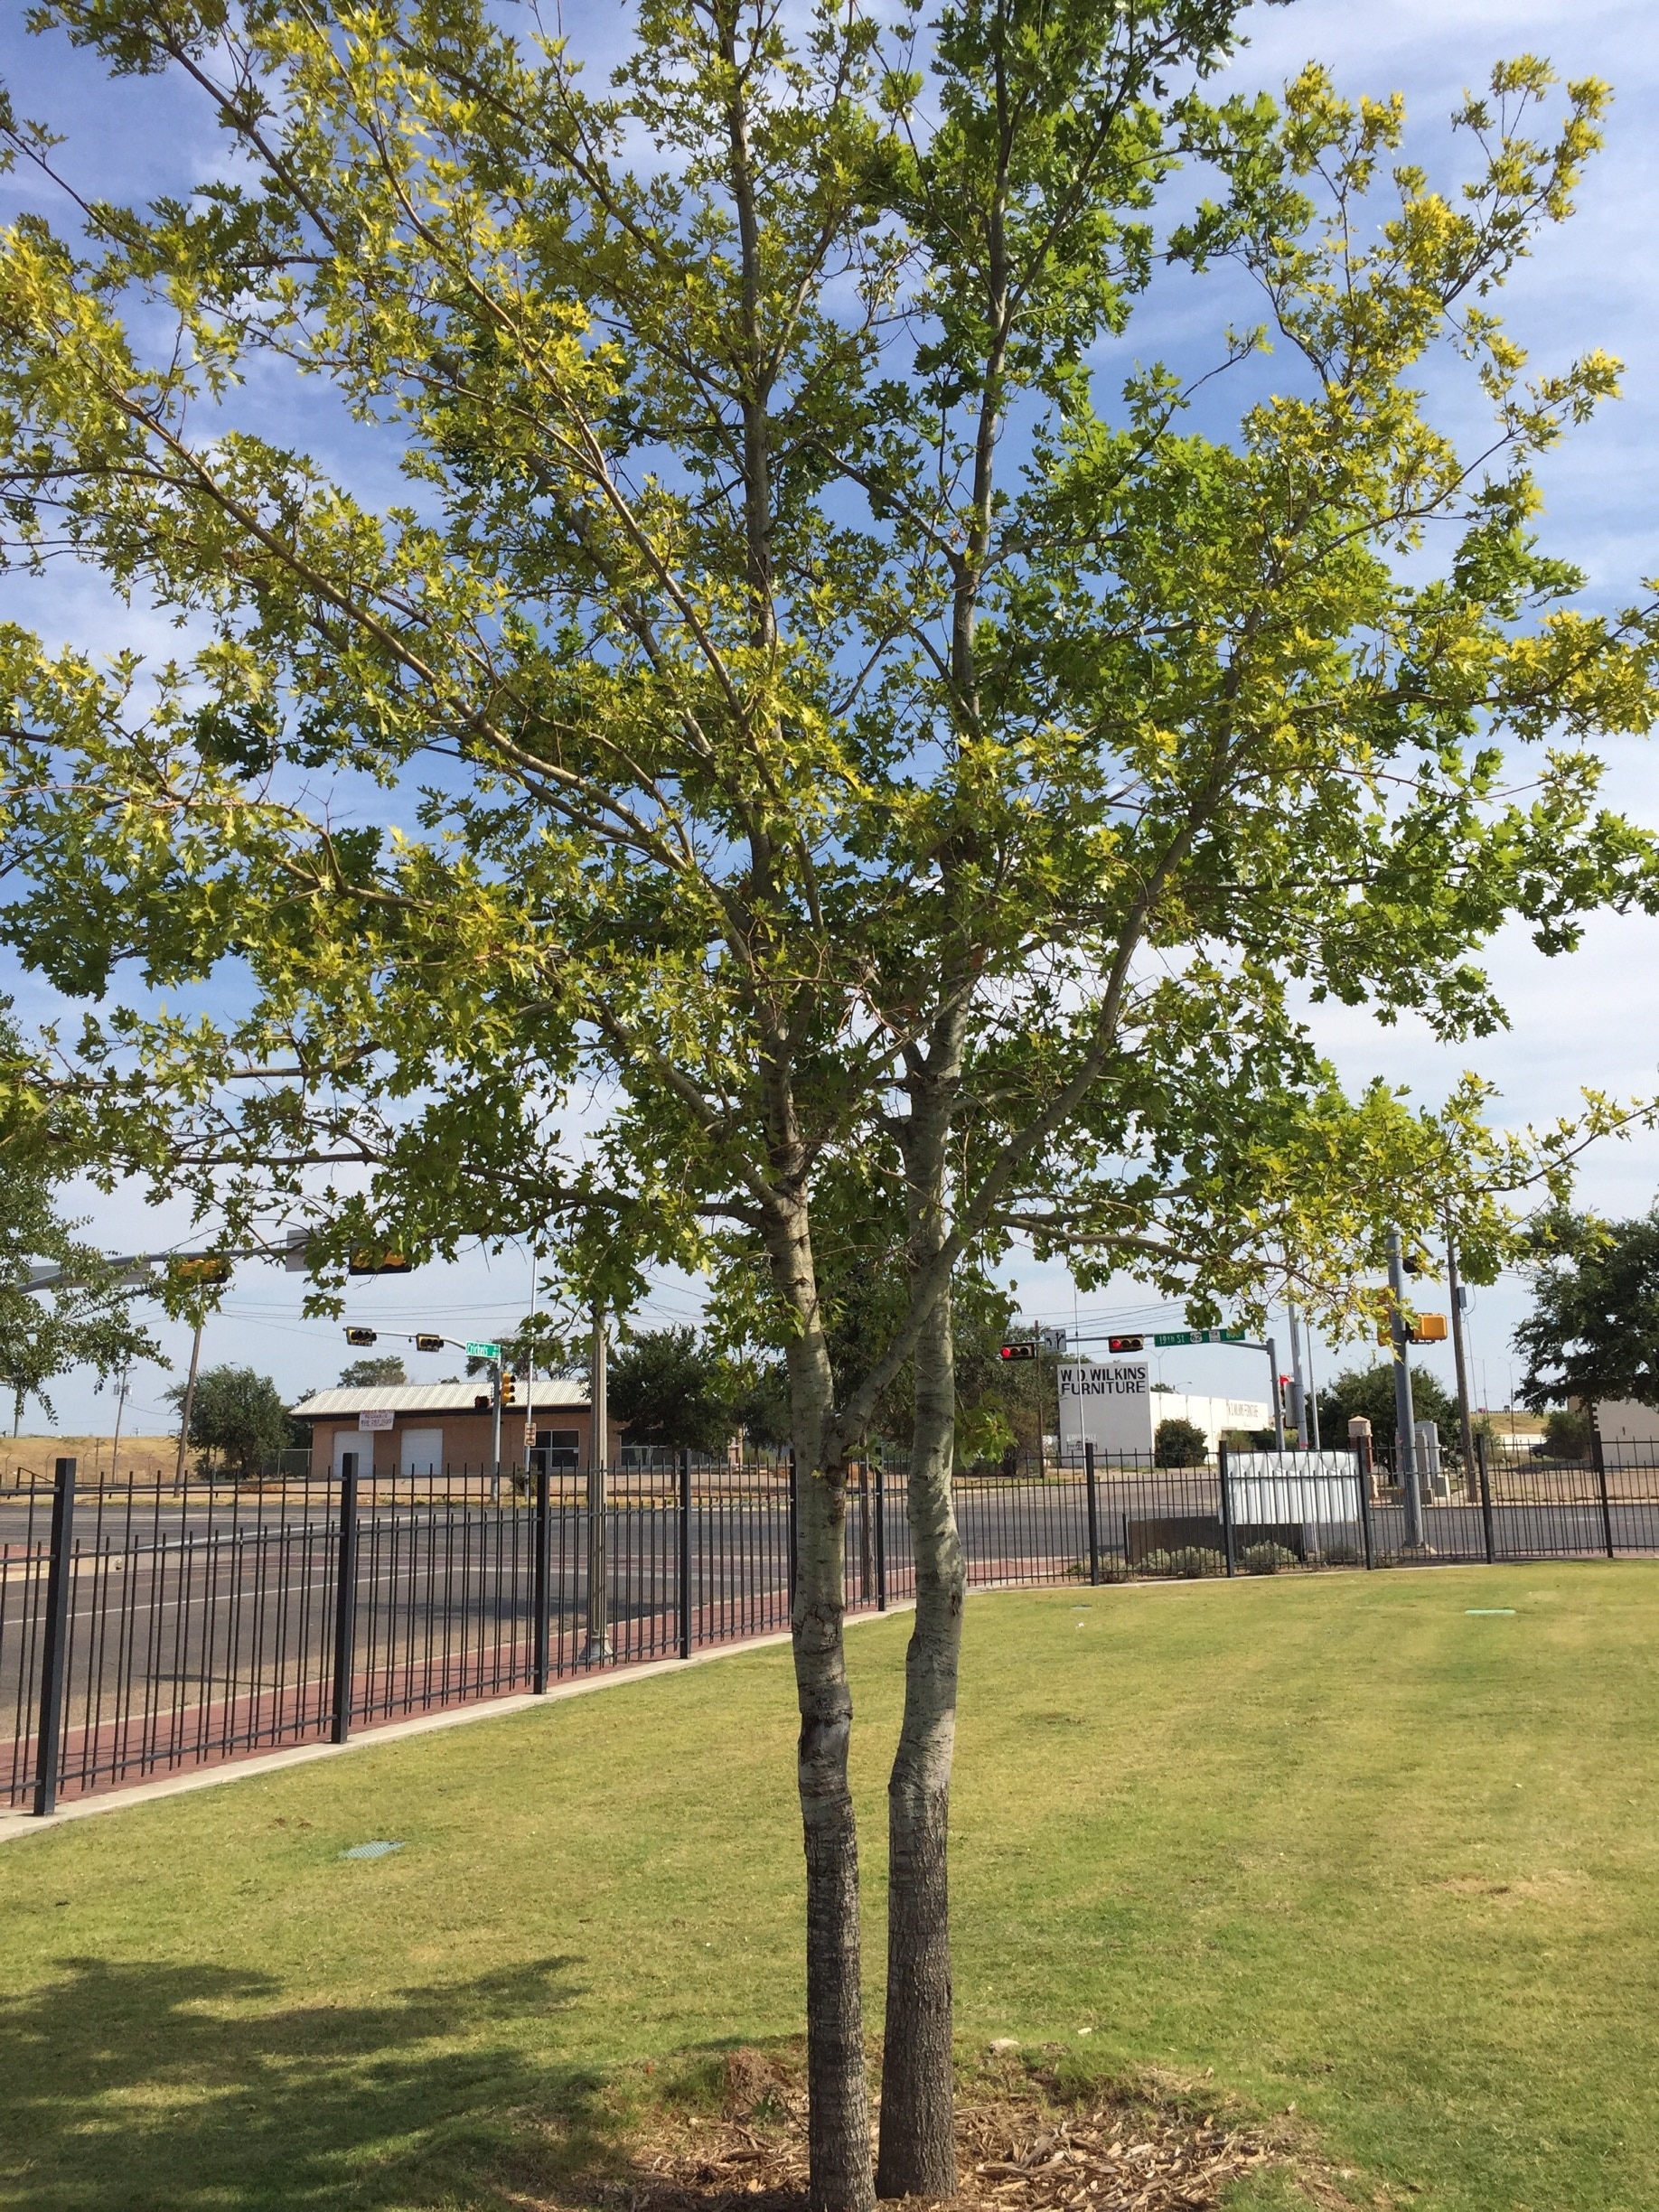 The McCartney oak was donated by Paul McCartney at the park as dedication to the people of Lubbock and Buddy Holly's influence to the musical style of The Beatles.